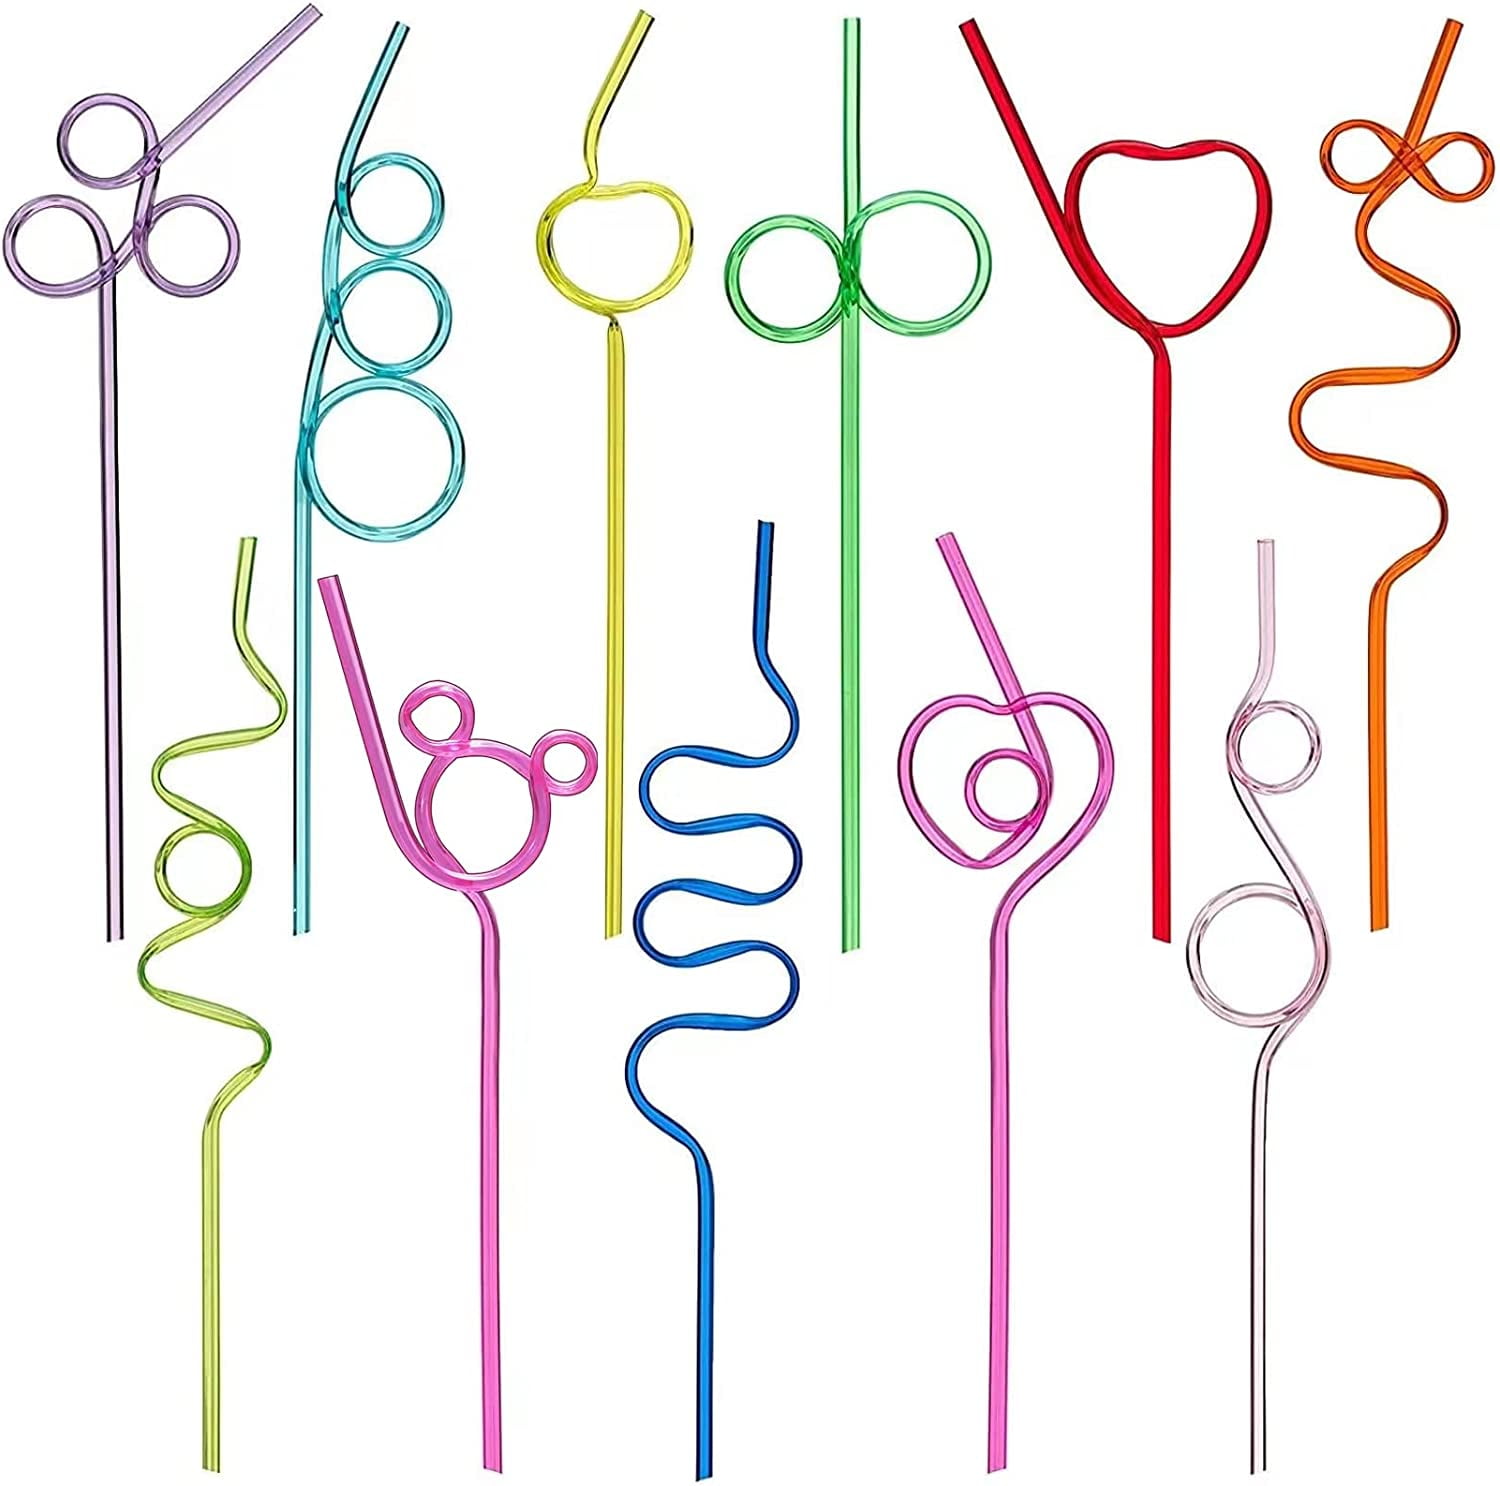 Crazy Straws,24 Pcs Silly Straws for Kids &Adults,Reusable Plastic Loop  Curly Cr